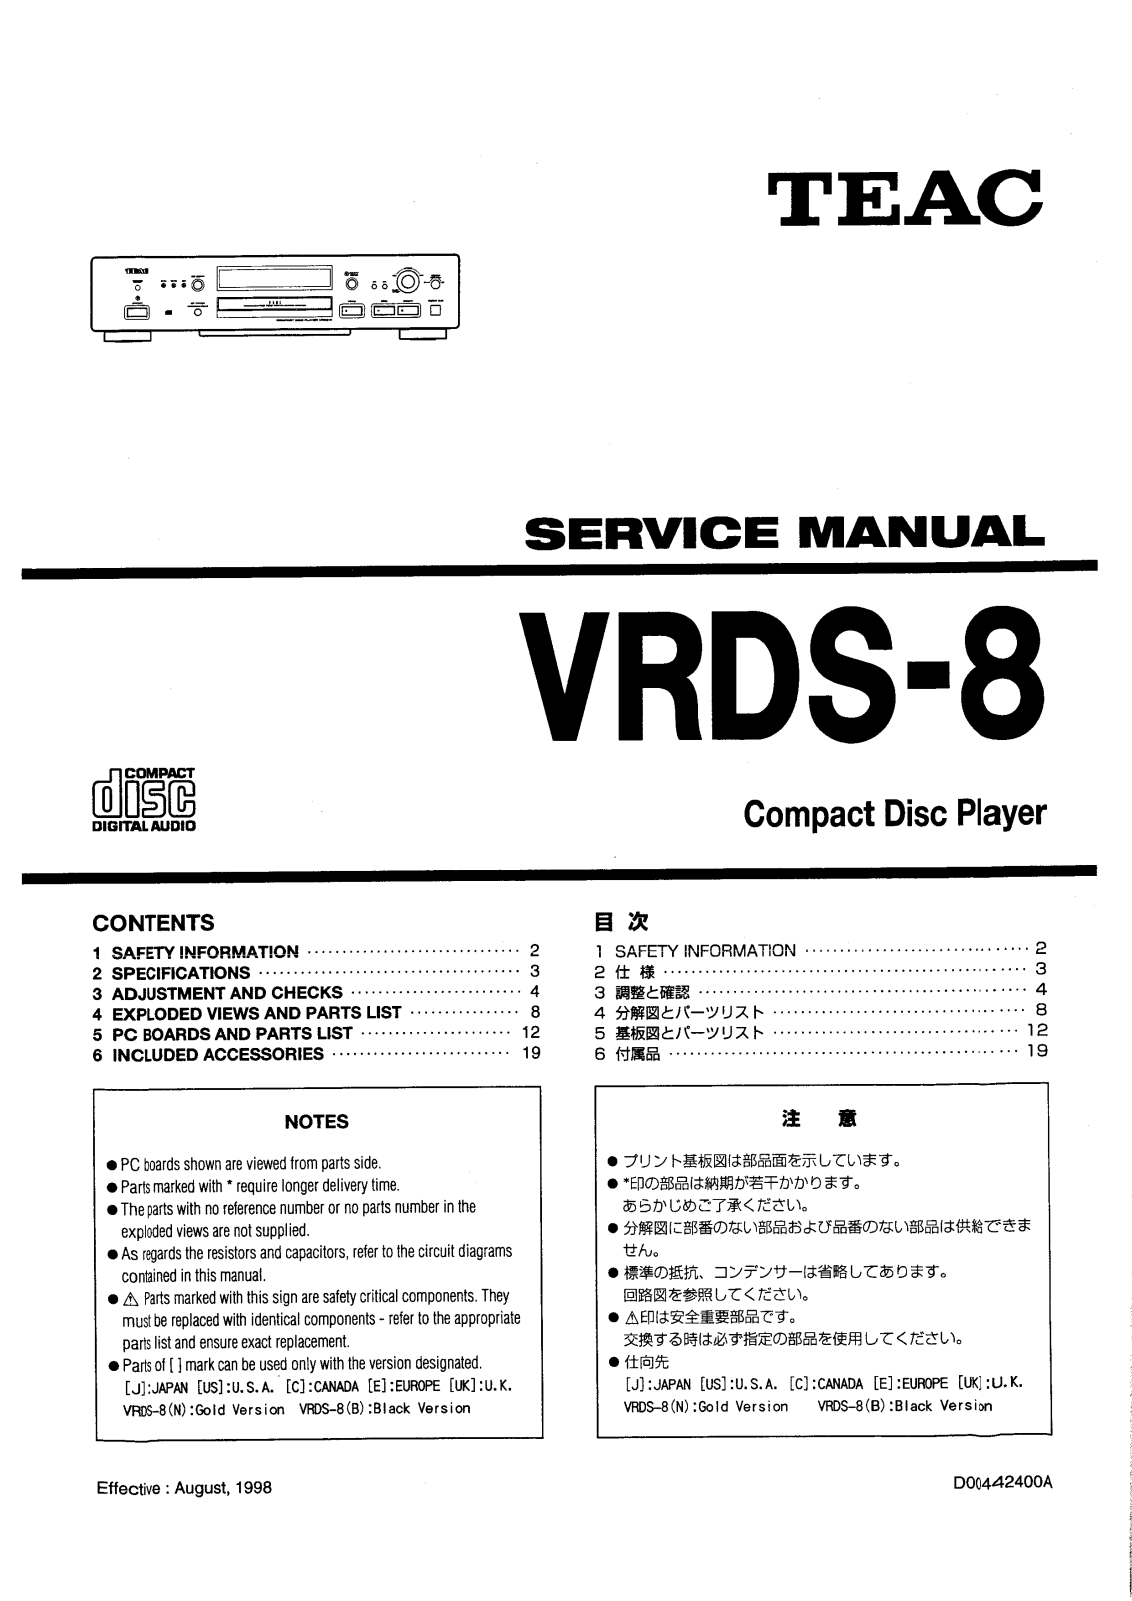 TEAC VRDS-8 Service manual